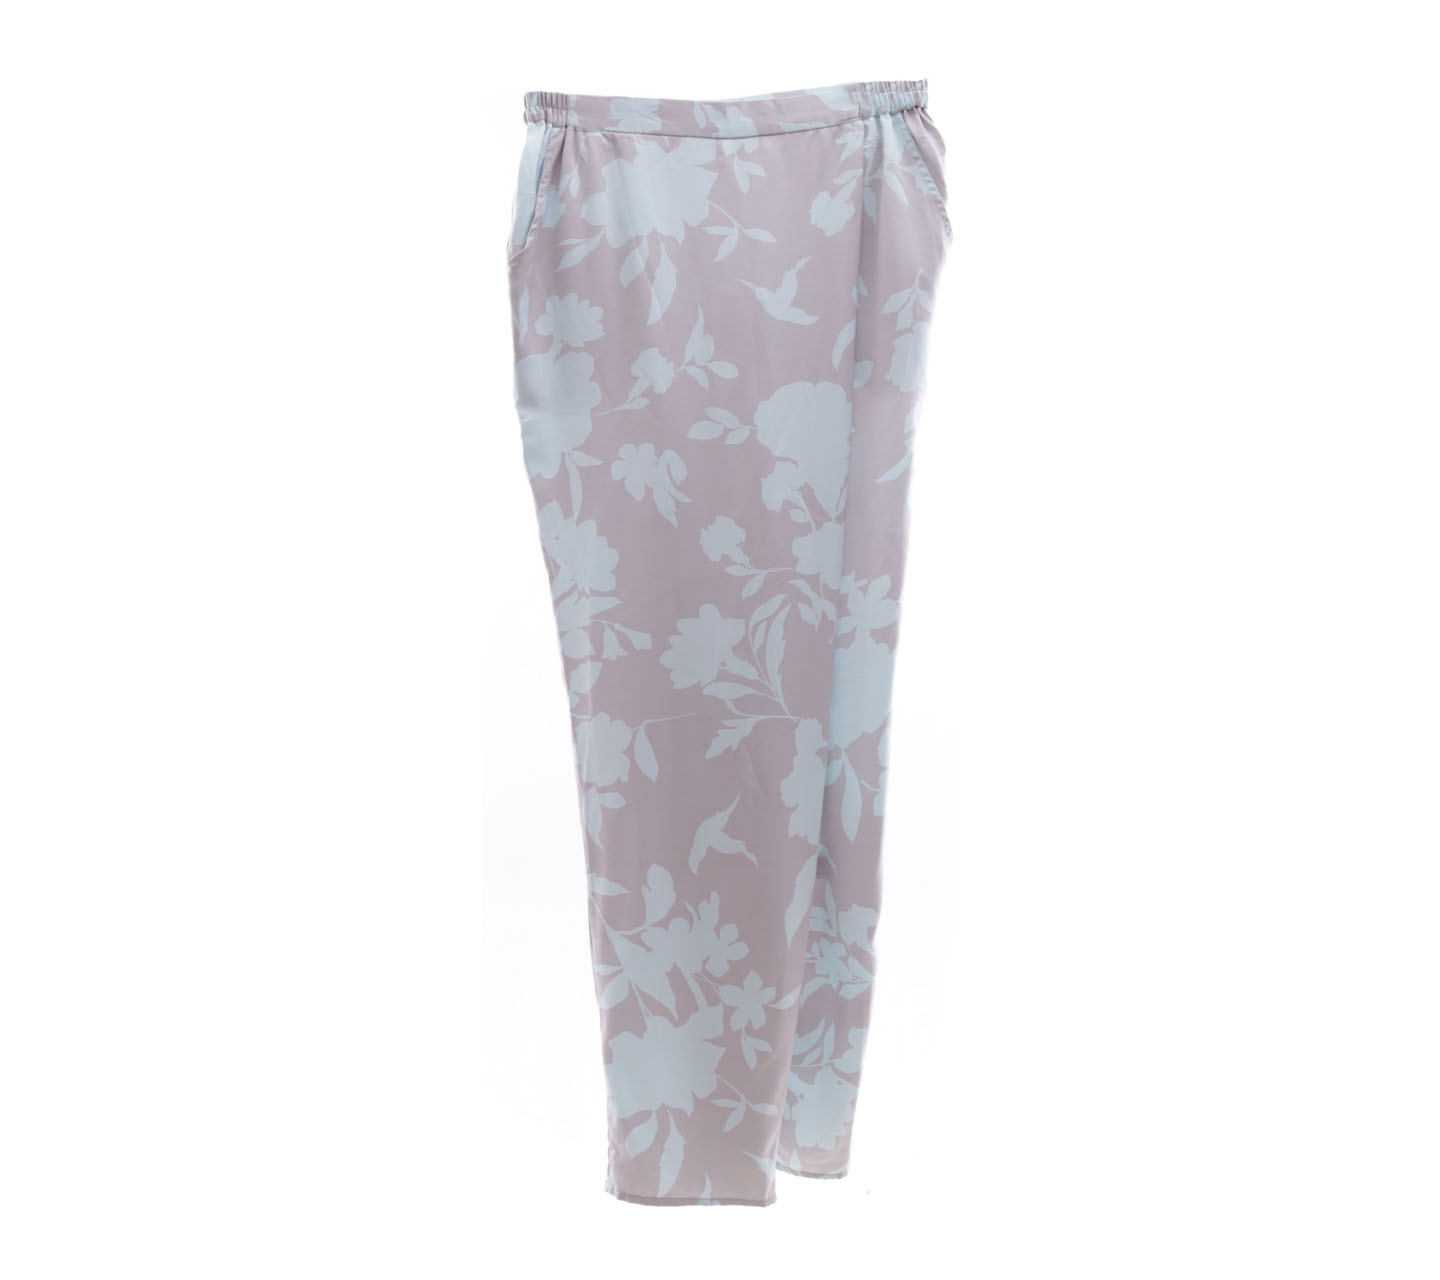 Riamiranda Taupe & Blue Printed Floral Trousers